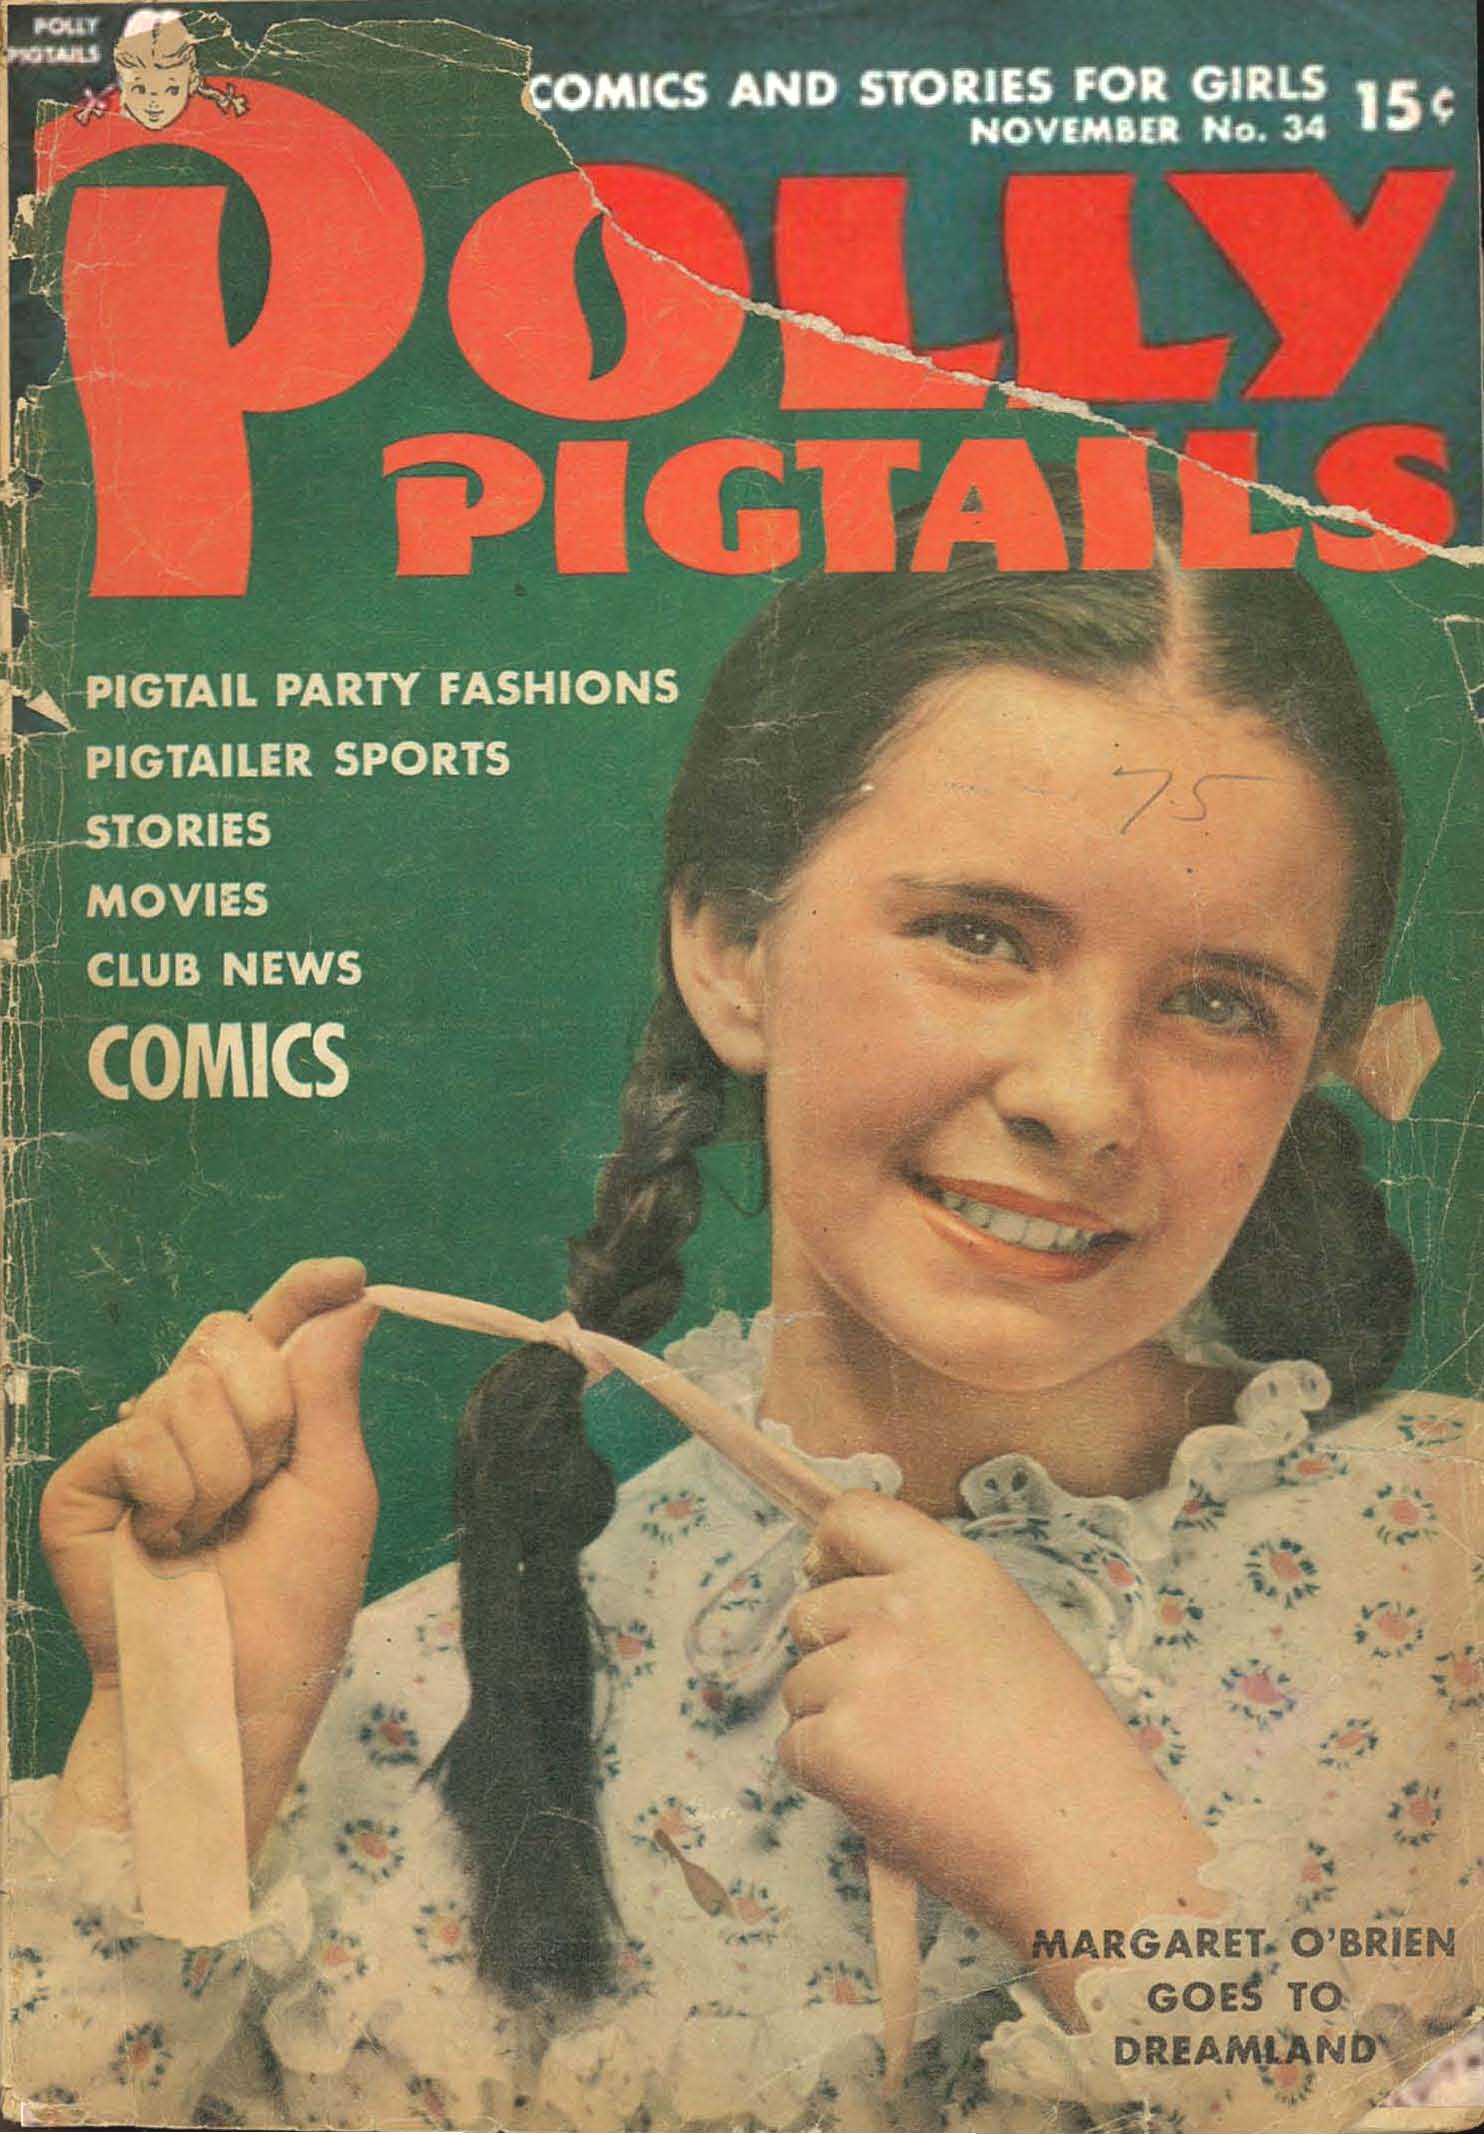 Comic Book Cover For Polly Pigtails 34 - Version 2